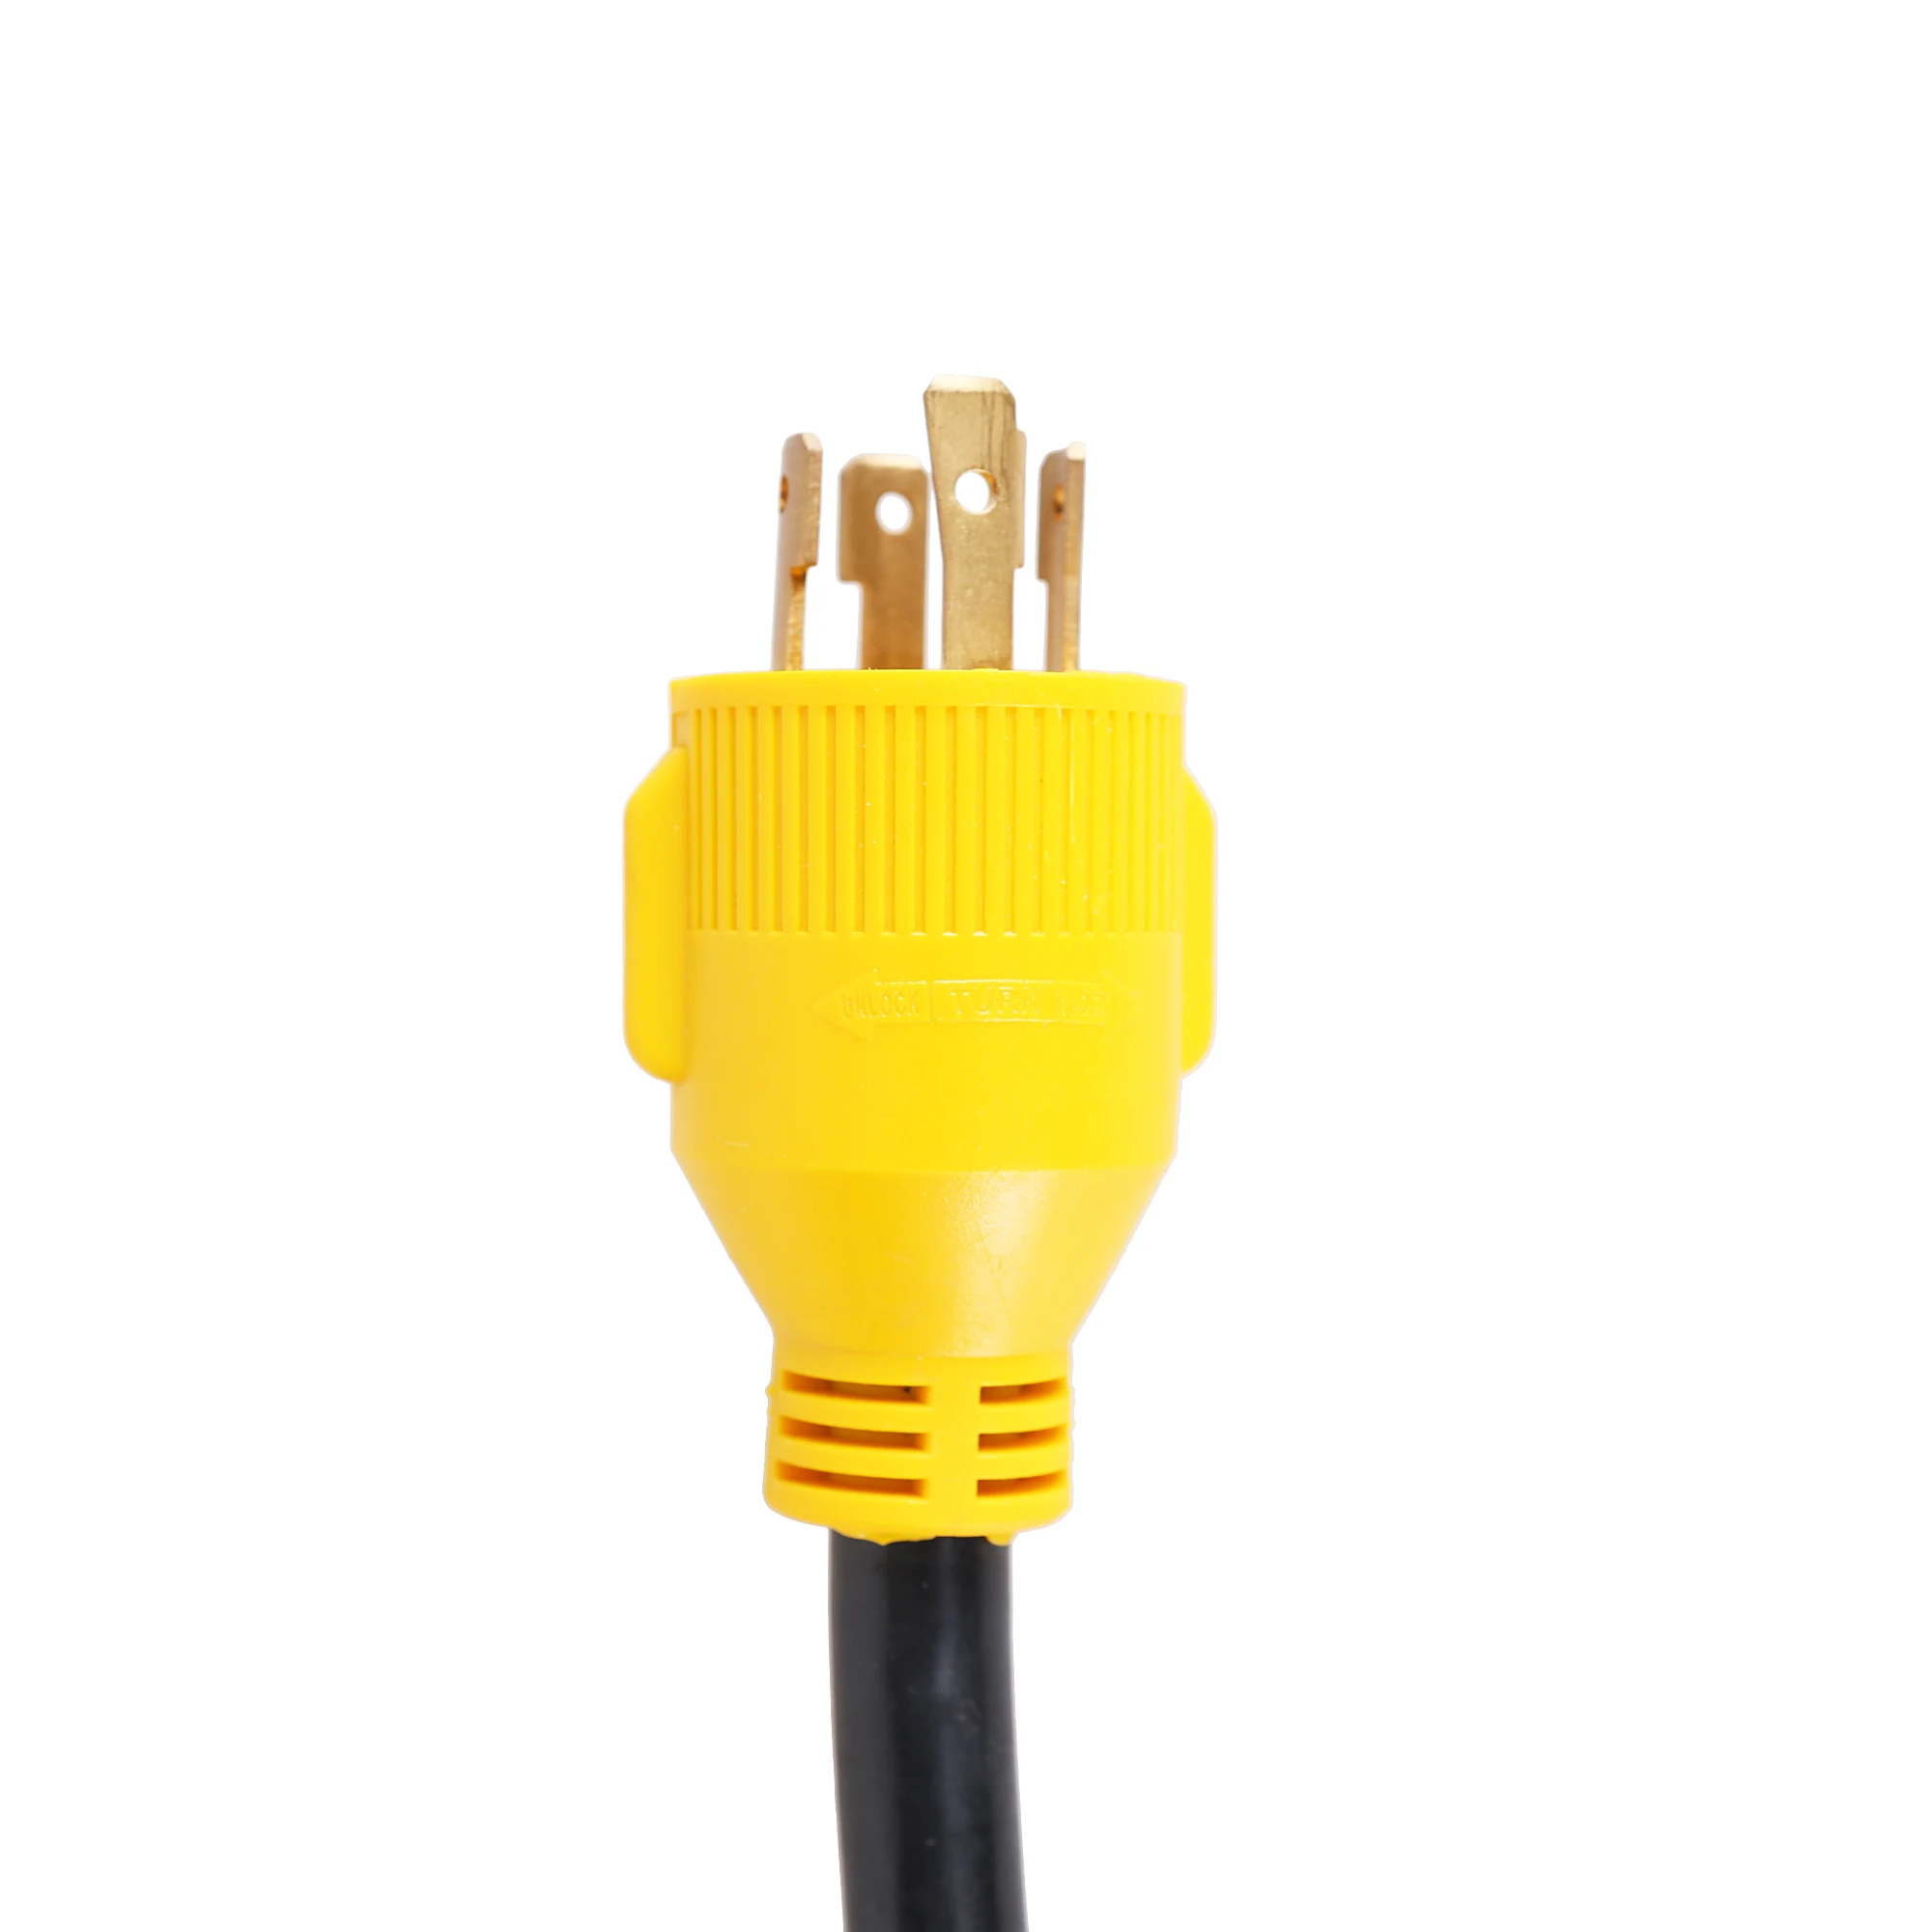 40" STW Yellow Twist-to-Lock “Y” Adapter w/ 50A Plug to Two 30A Connectors